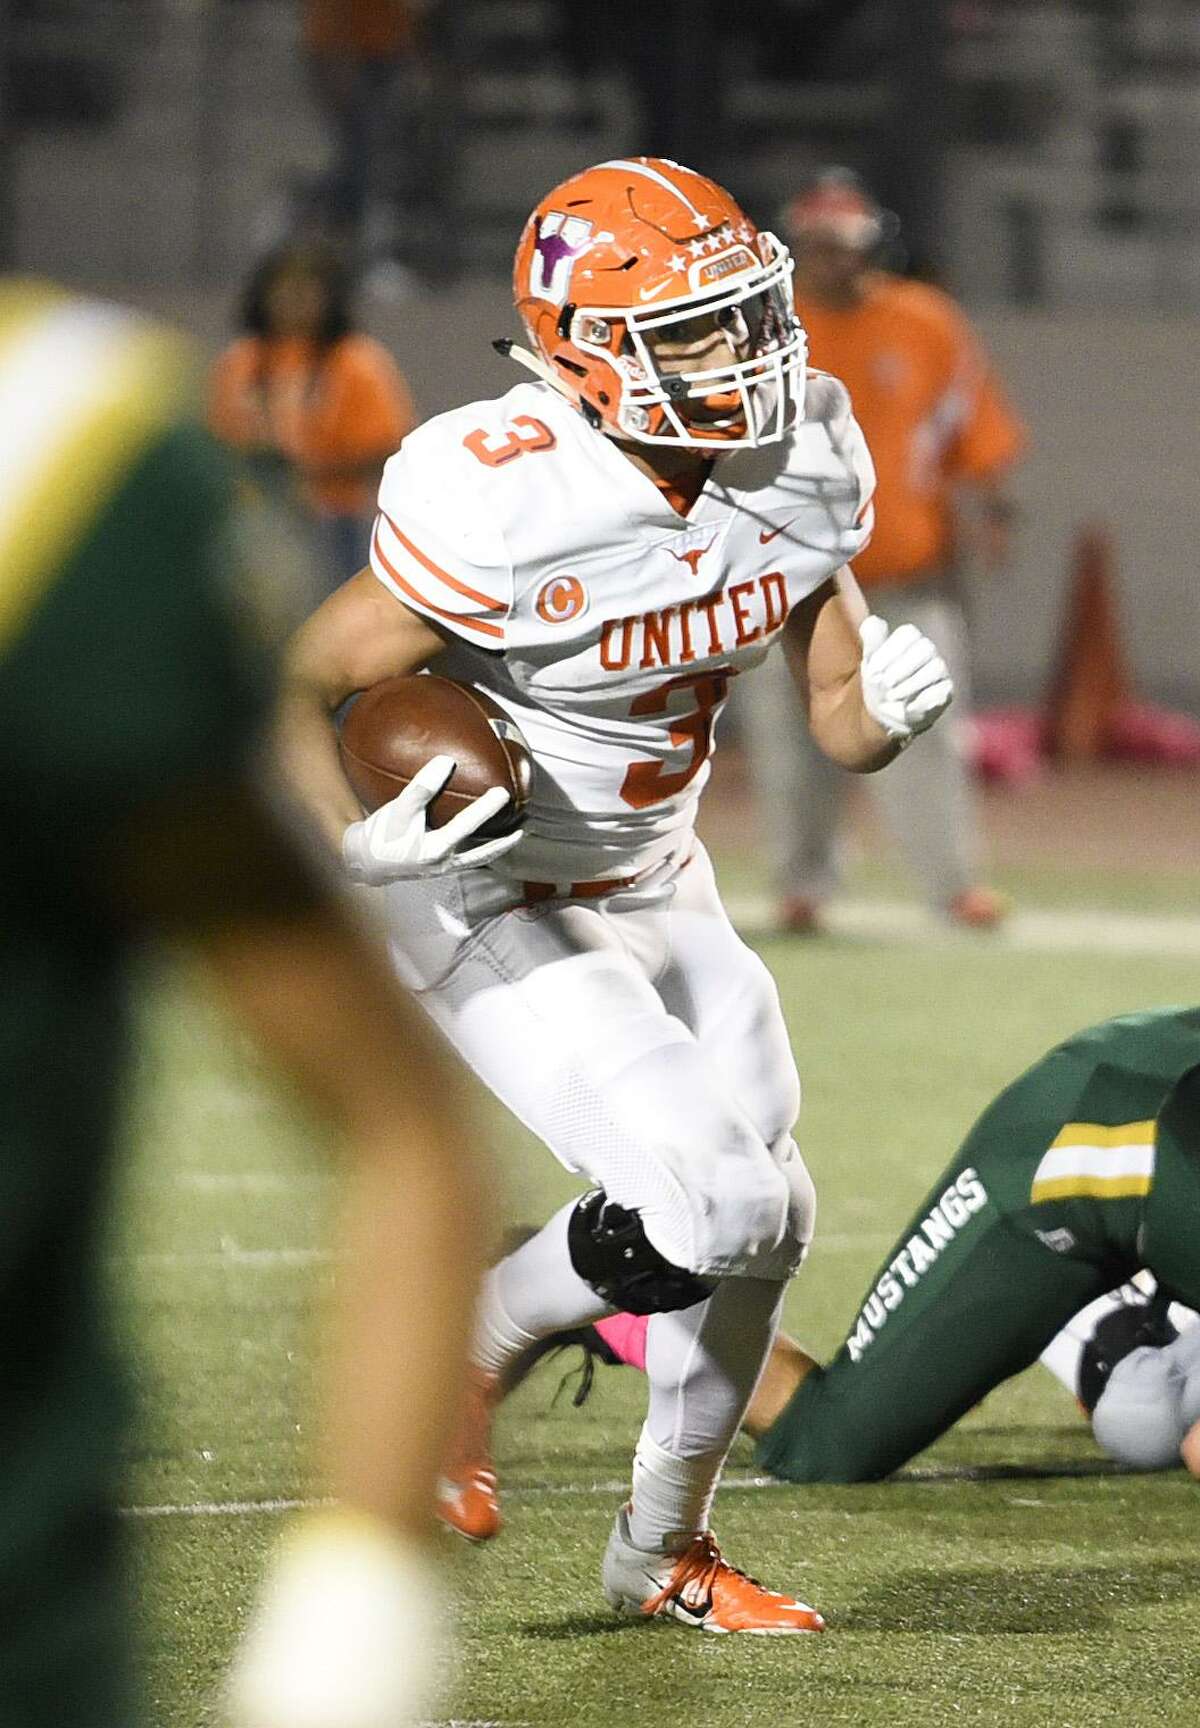 United’s Jerry Gonzalez rushed for 1,865 yards and 19 touchdowns and had 226 receiving yards and two scores on his way to being named the District 29-6A Offensive MVP.